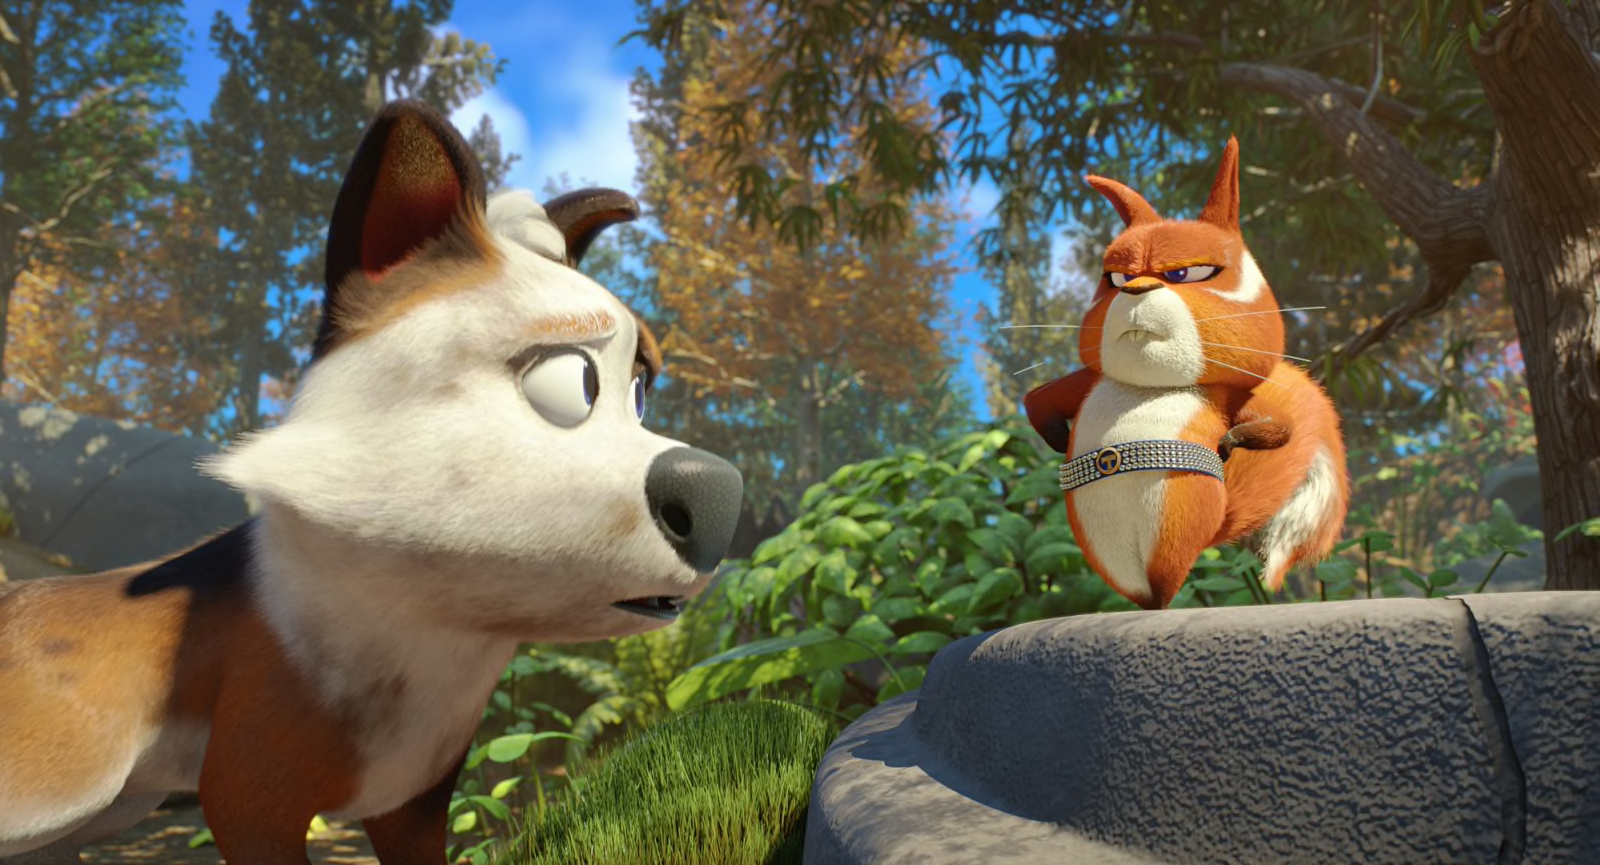 Dog Gone Trouble is an animated dog movie that will leave adults laughing